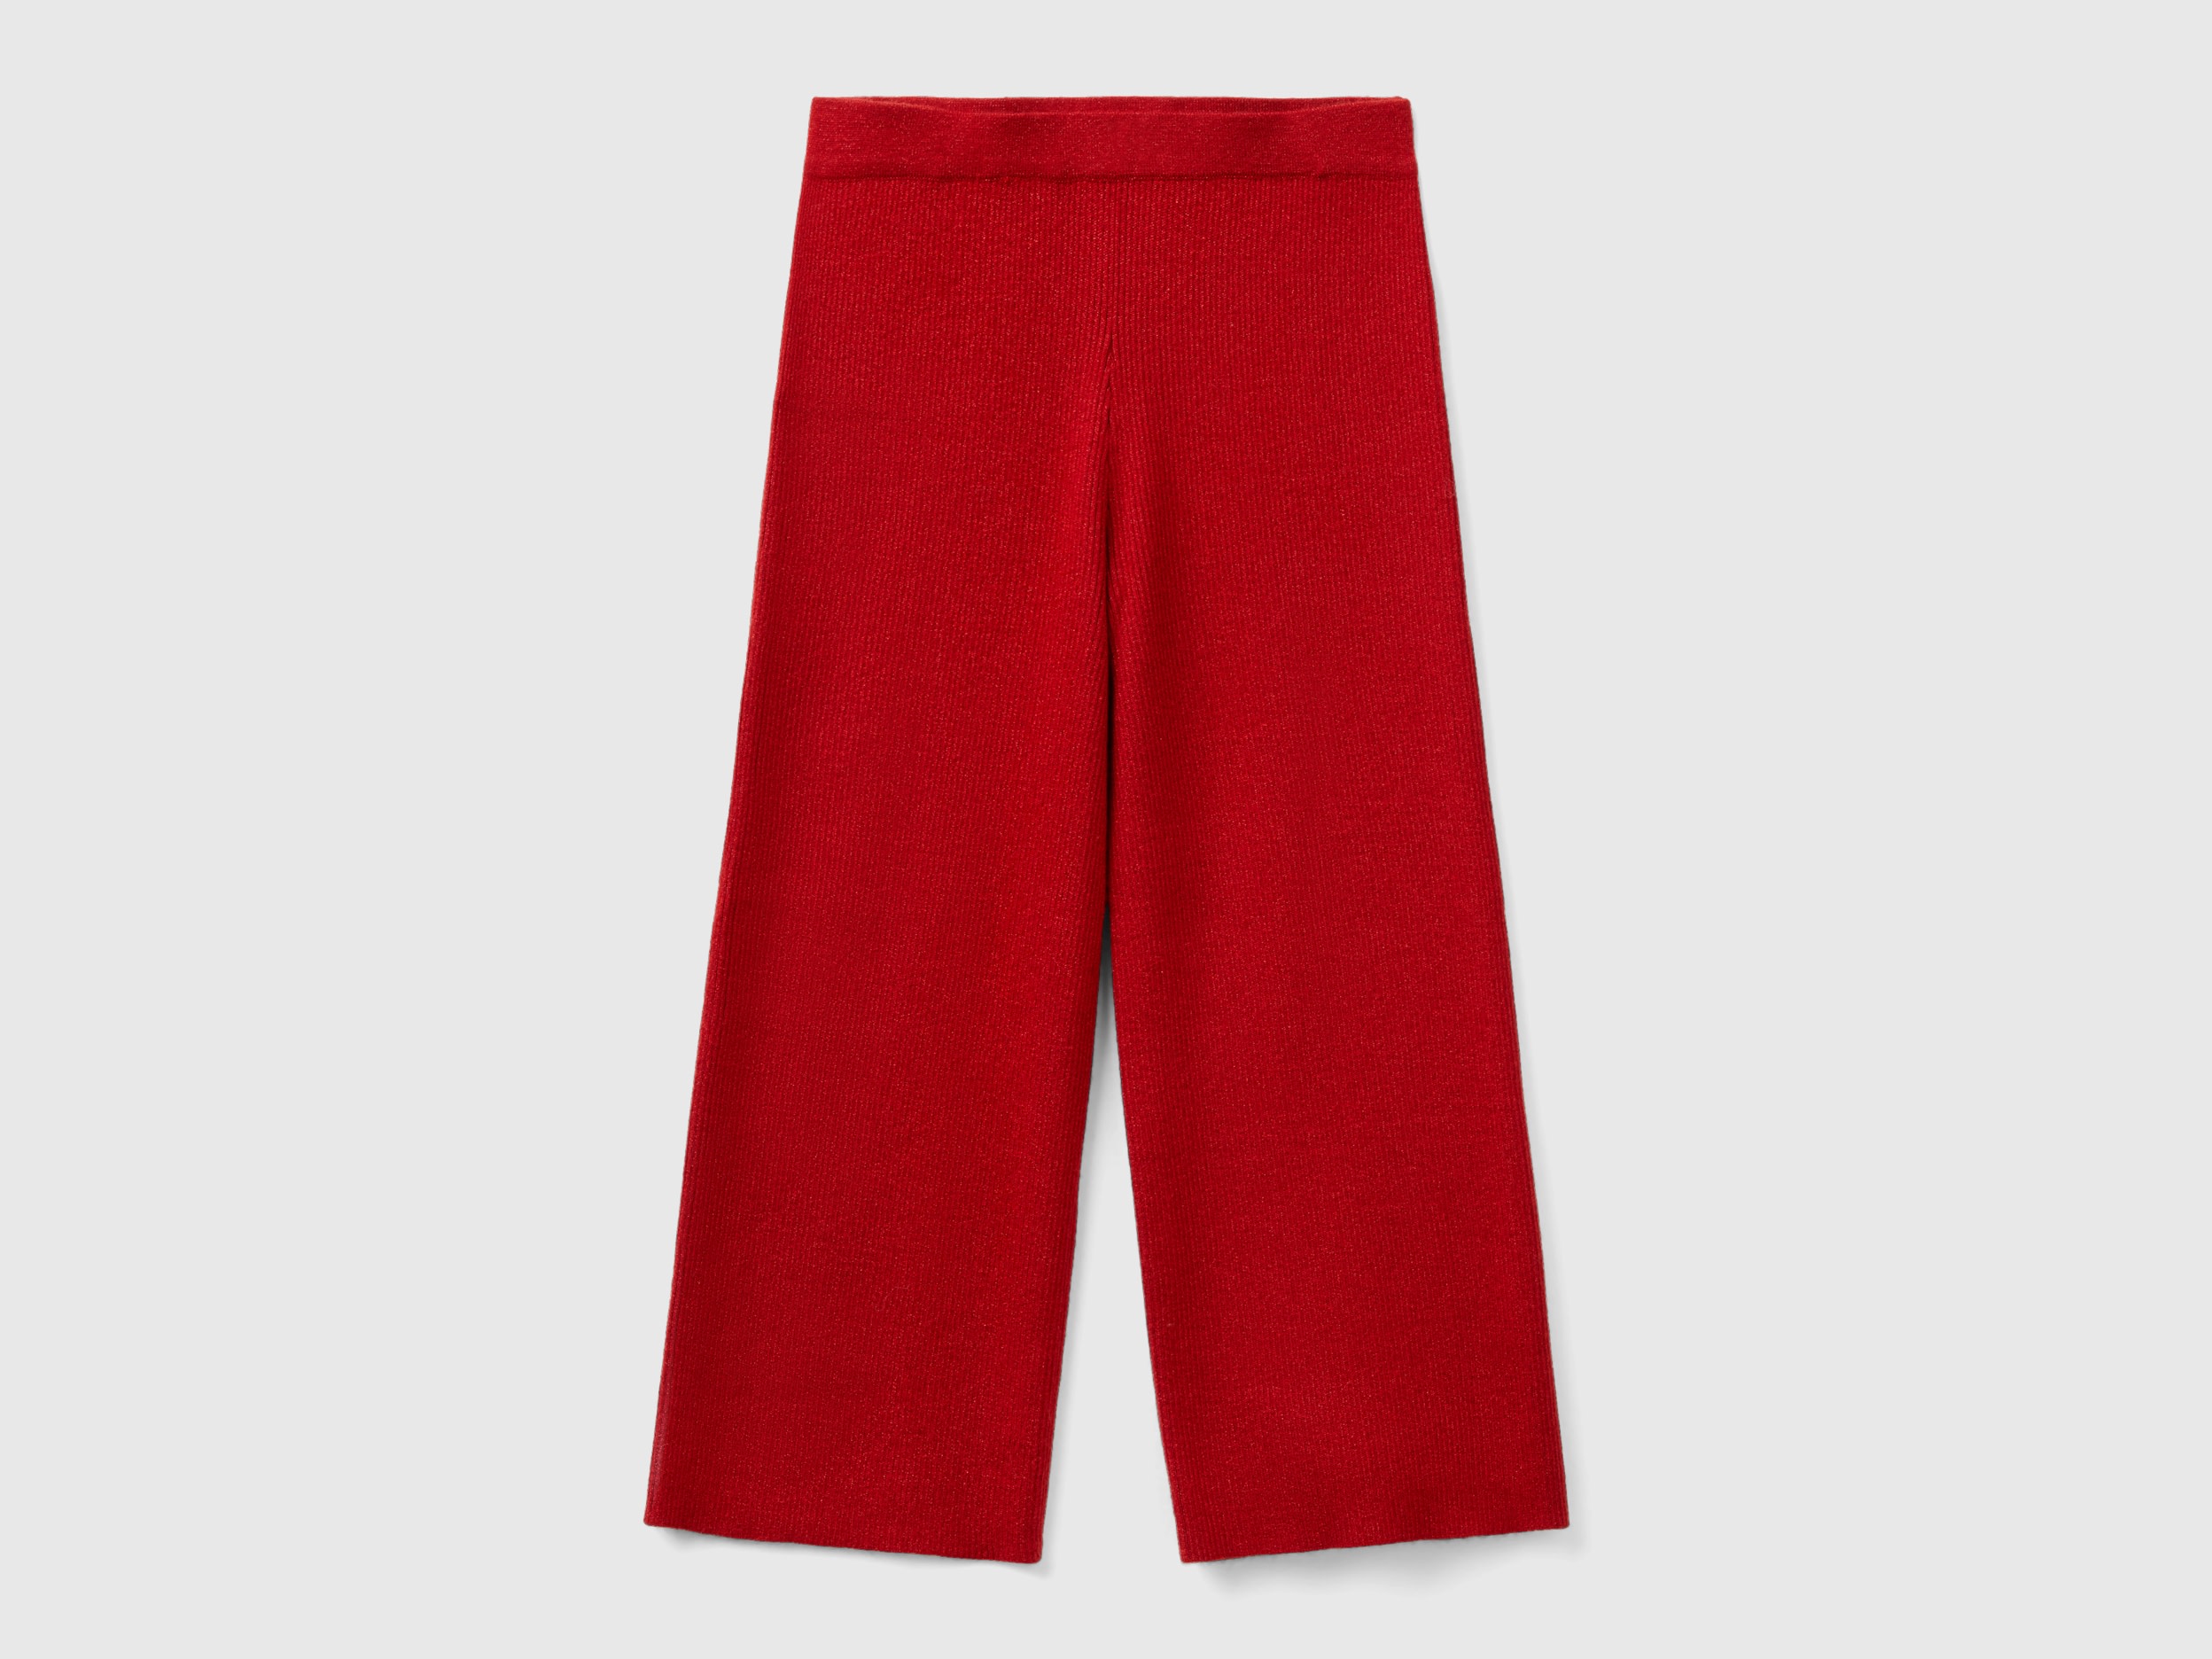 Benetton, Knit Pants With Lurex, size XL, Red, Kids